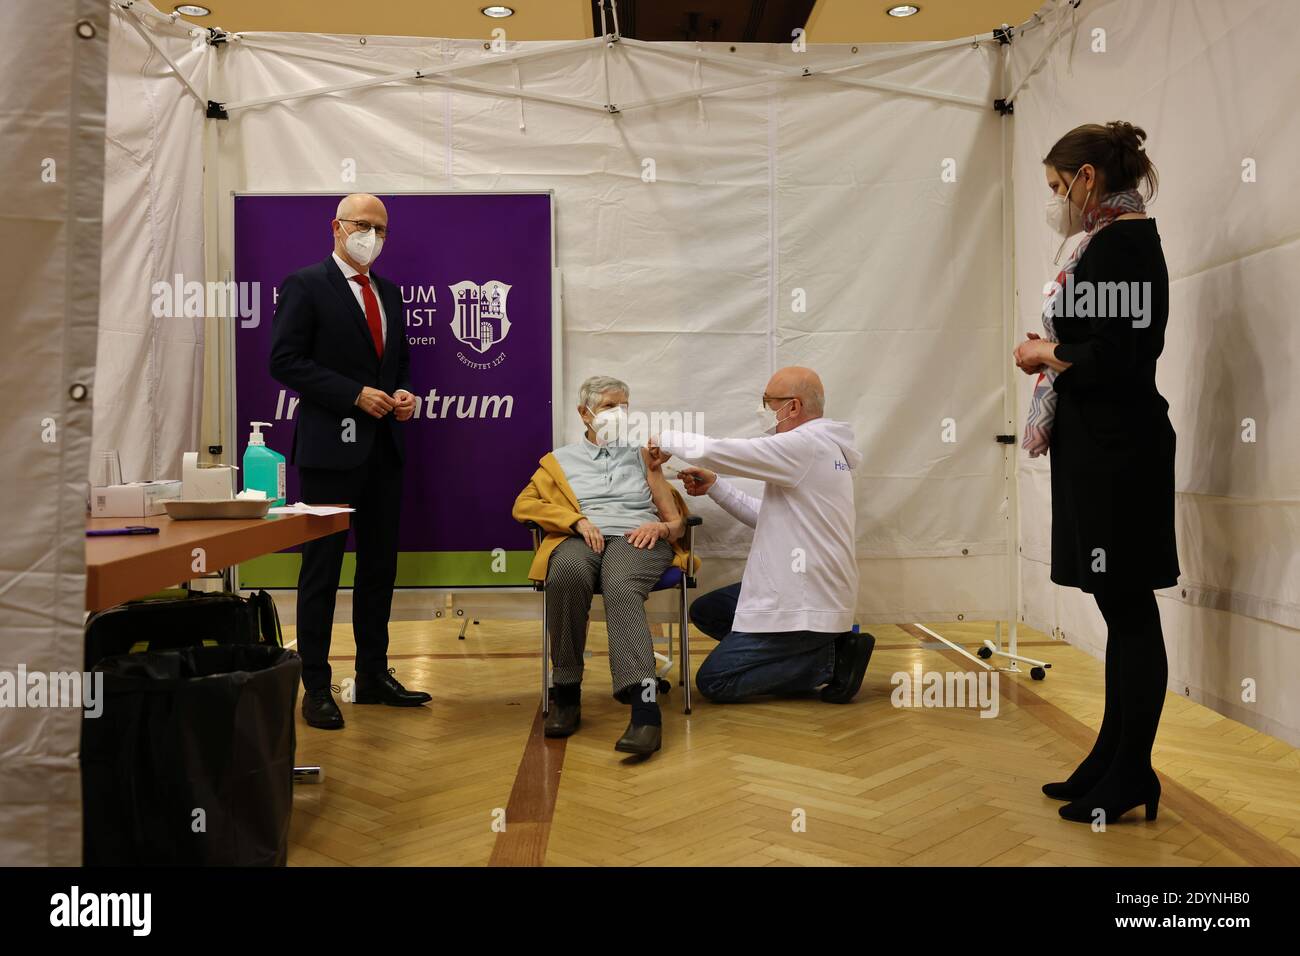 Hamburg, Germany. 27th Dec, 2020. Peter Tschentscher (l), First Mayor in Hamburg, Melanie Leonhard (r, both SPD), Senator for Labour, Social Affairs, Family and Integration in Hamburg, watch as Karin Sievers (84) receives the first vaccination from Dirk Heinrich (M r), Medical Director of the Vaccination Centre Hamburg at the Messehallen, at the Hospital zum Heiligen Geist in the Poppenbüttel district. On Sunday, the Corona vaccinations with the Covid-19 vaccine from Biontech-Pfizer started in Germany. Credit: Christian Charisius/dpa/Alamy Live News Stock Photo